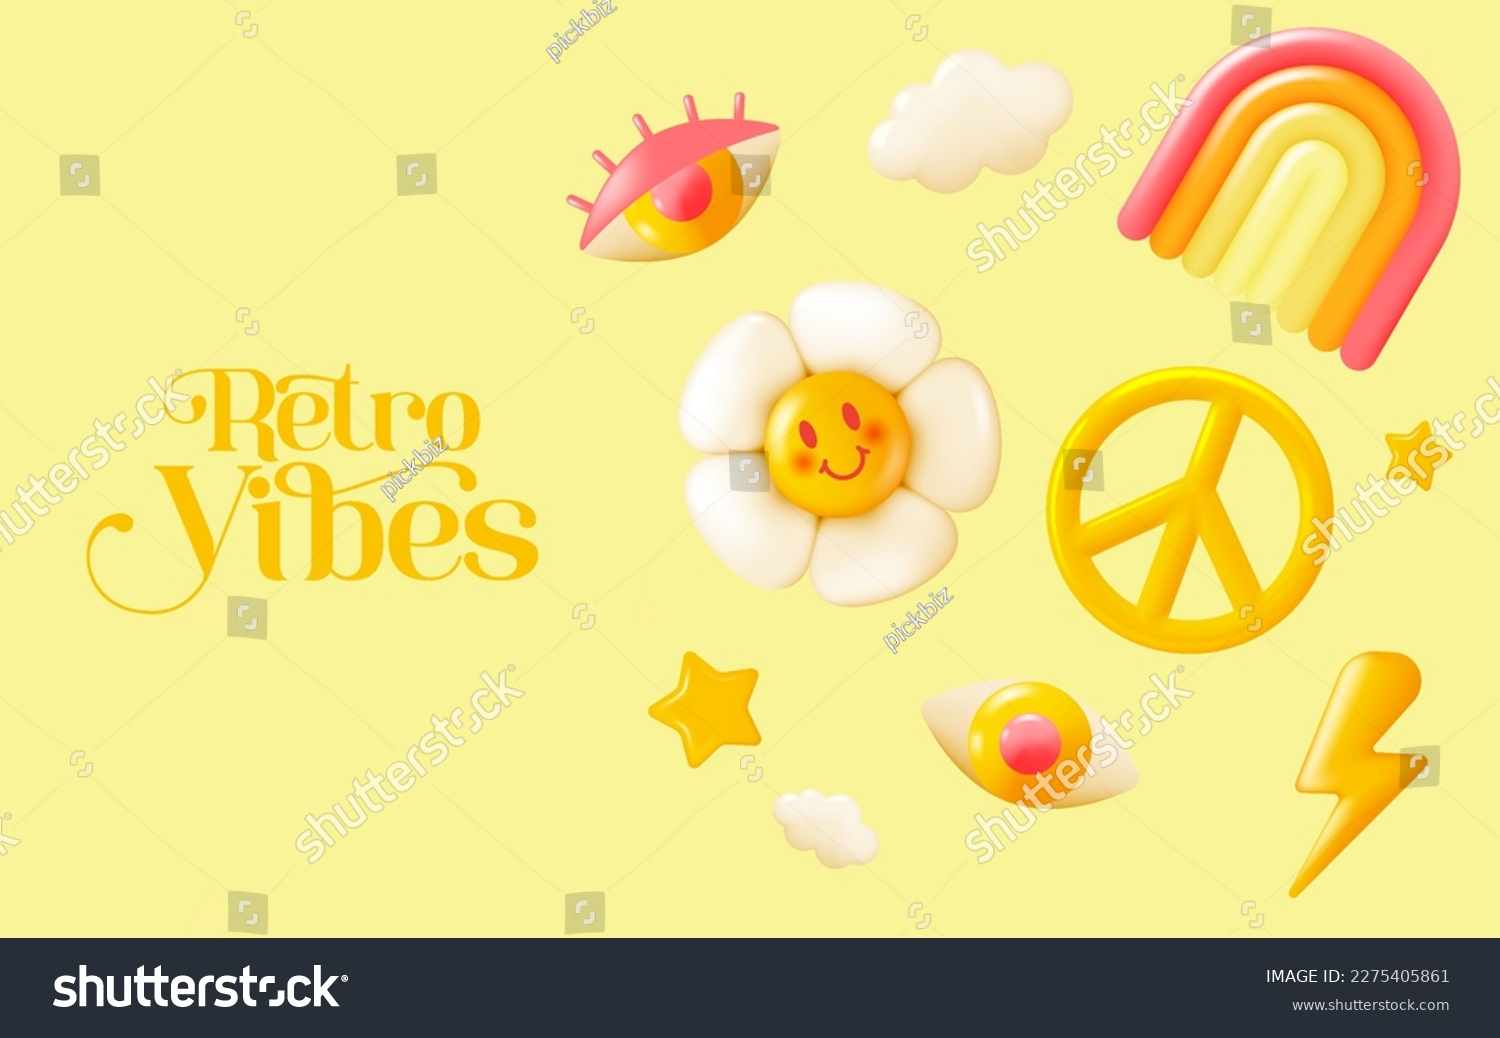 SVG of 70s retro vibes icons with retro color scheme 3d realistic vector illustration set svg